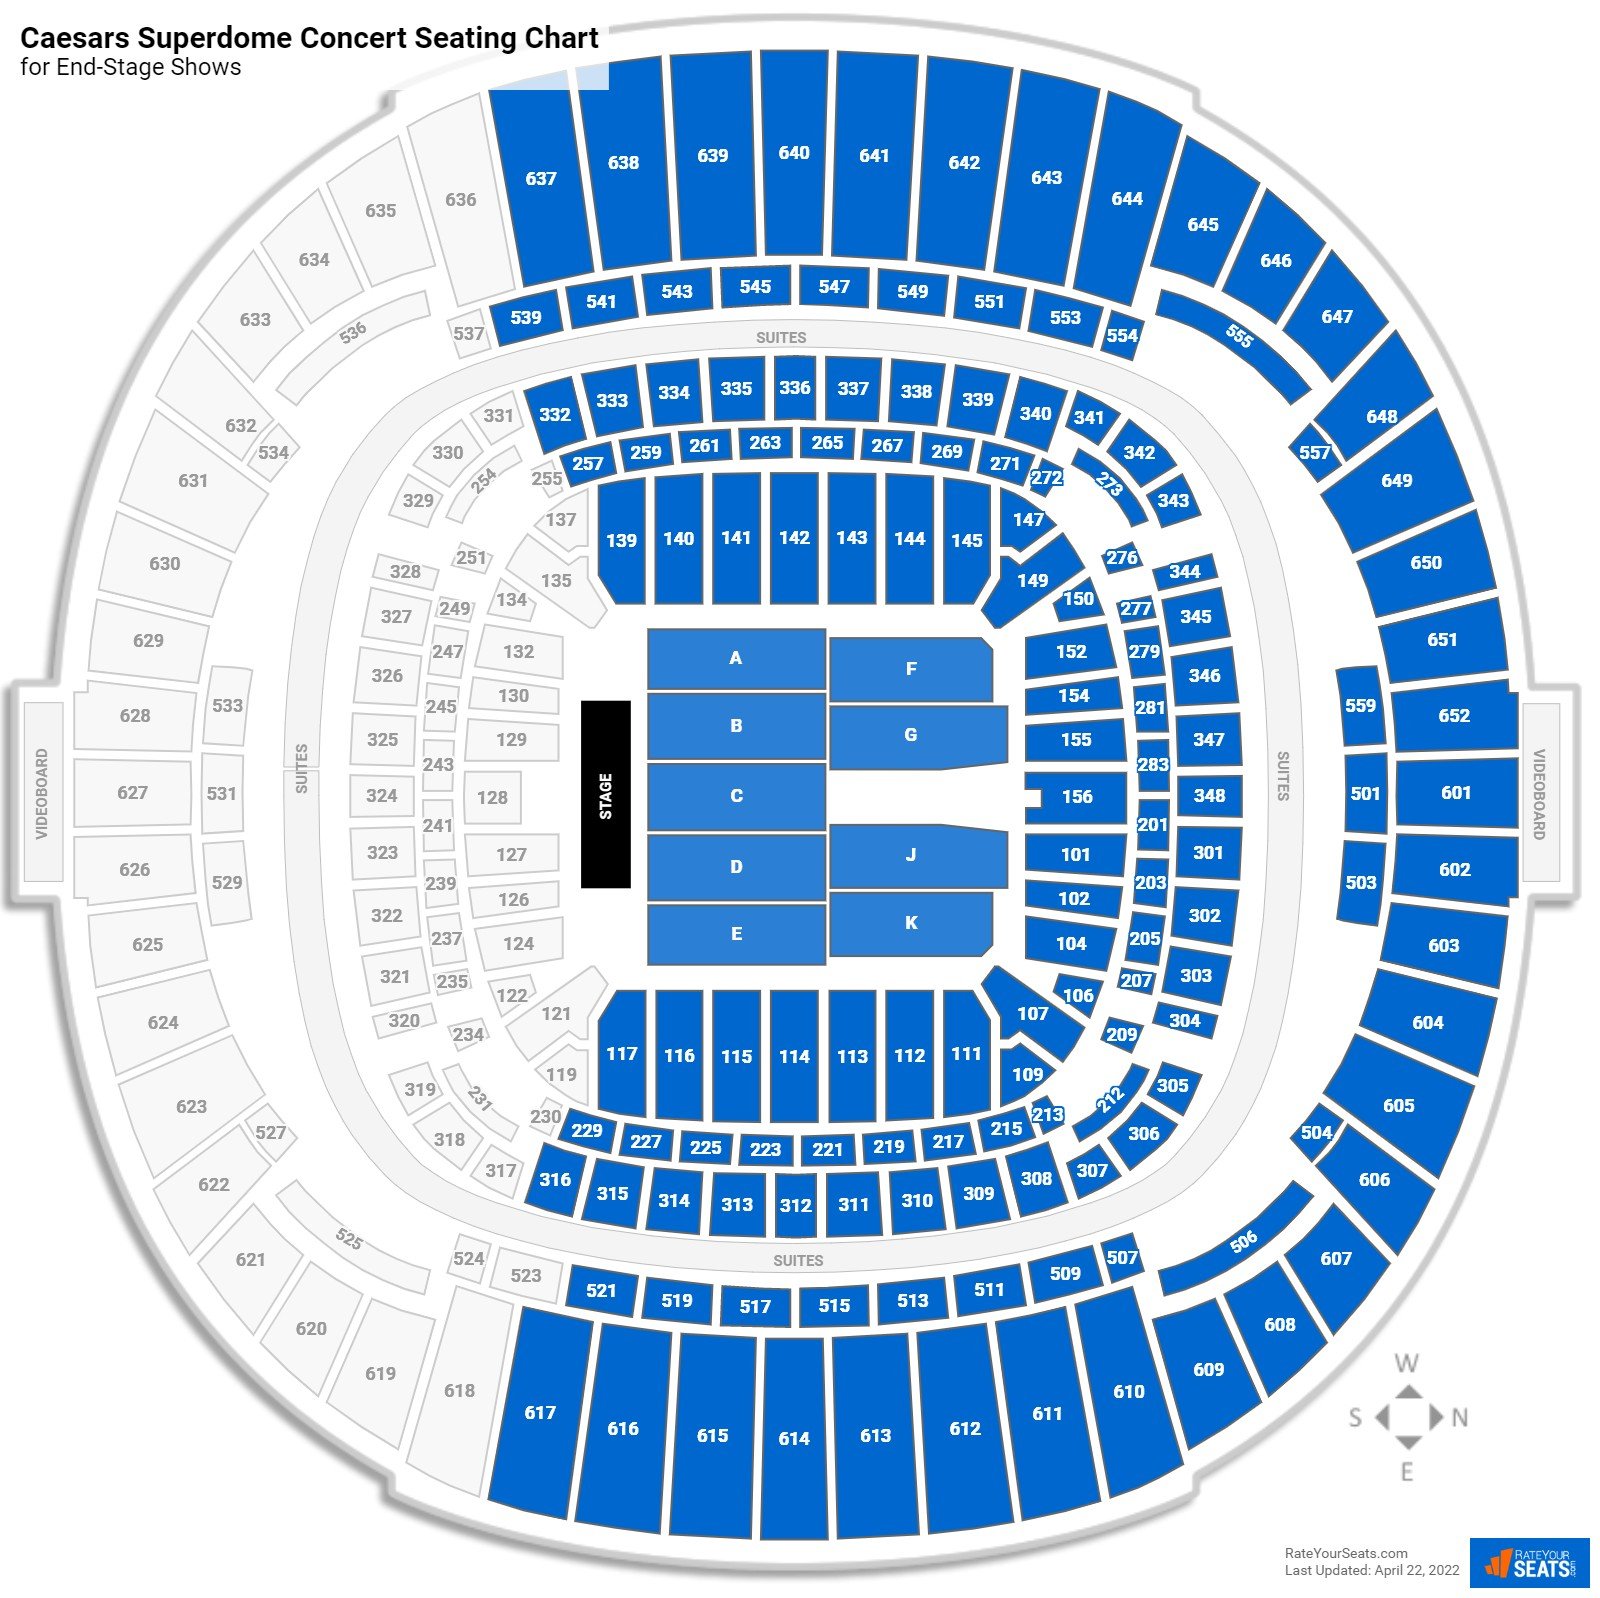 Superdome Seating Chart Elcho Table